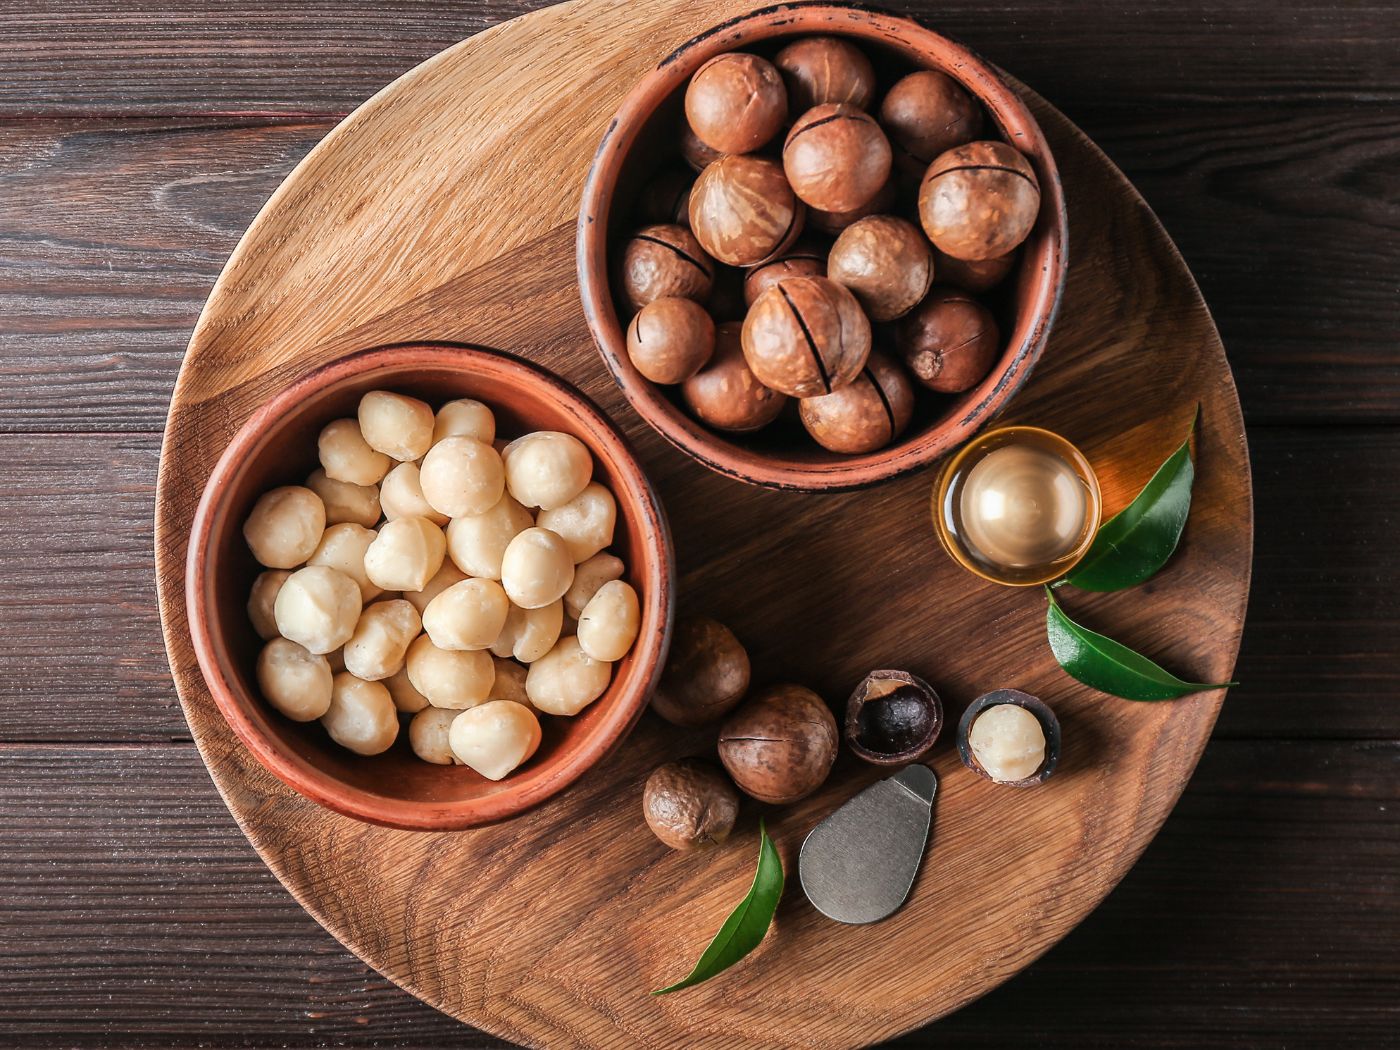 Macadamia: The Magical Benefits Of The Super Nut